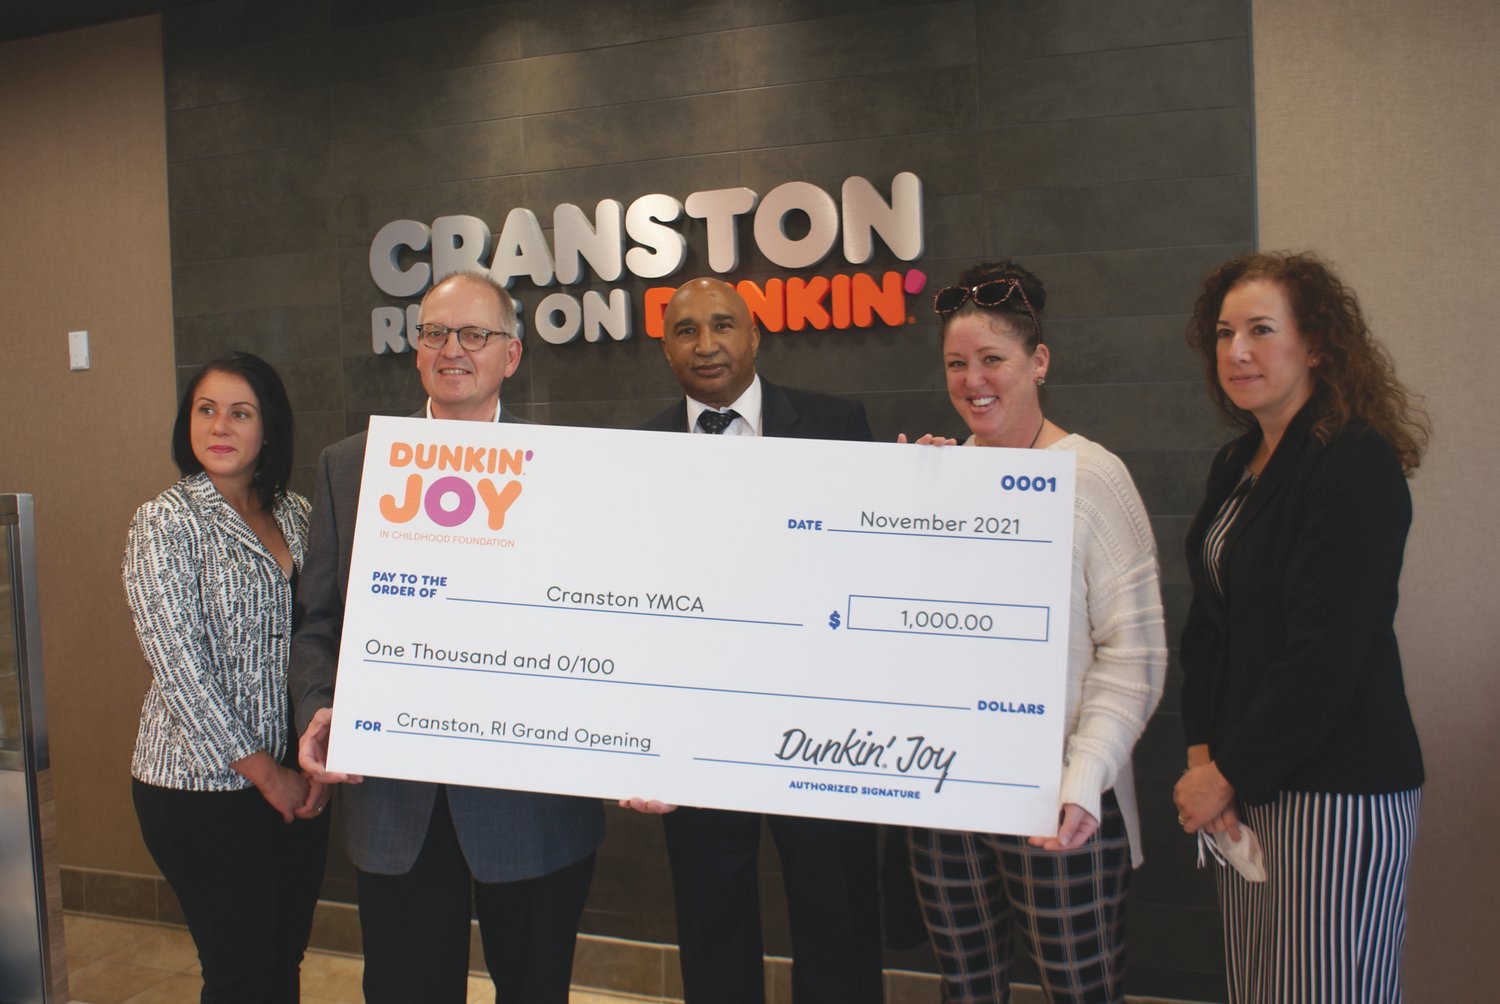 CHECK PRESENTATION: Bill Senecal (Director of Operations for Dunkin) presented a check in the amount of $1,000 to the Cranston YMCA on behalf of Fatima Dutra, Franchisee of the Dunkin location (not pictured), along with Citywide Council Woman Nicole Renzulli, Franklin Paolino (Director of Cranston Dept. of Economic Development) and Citywide Council Woman Jessica Marino.